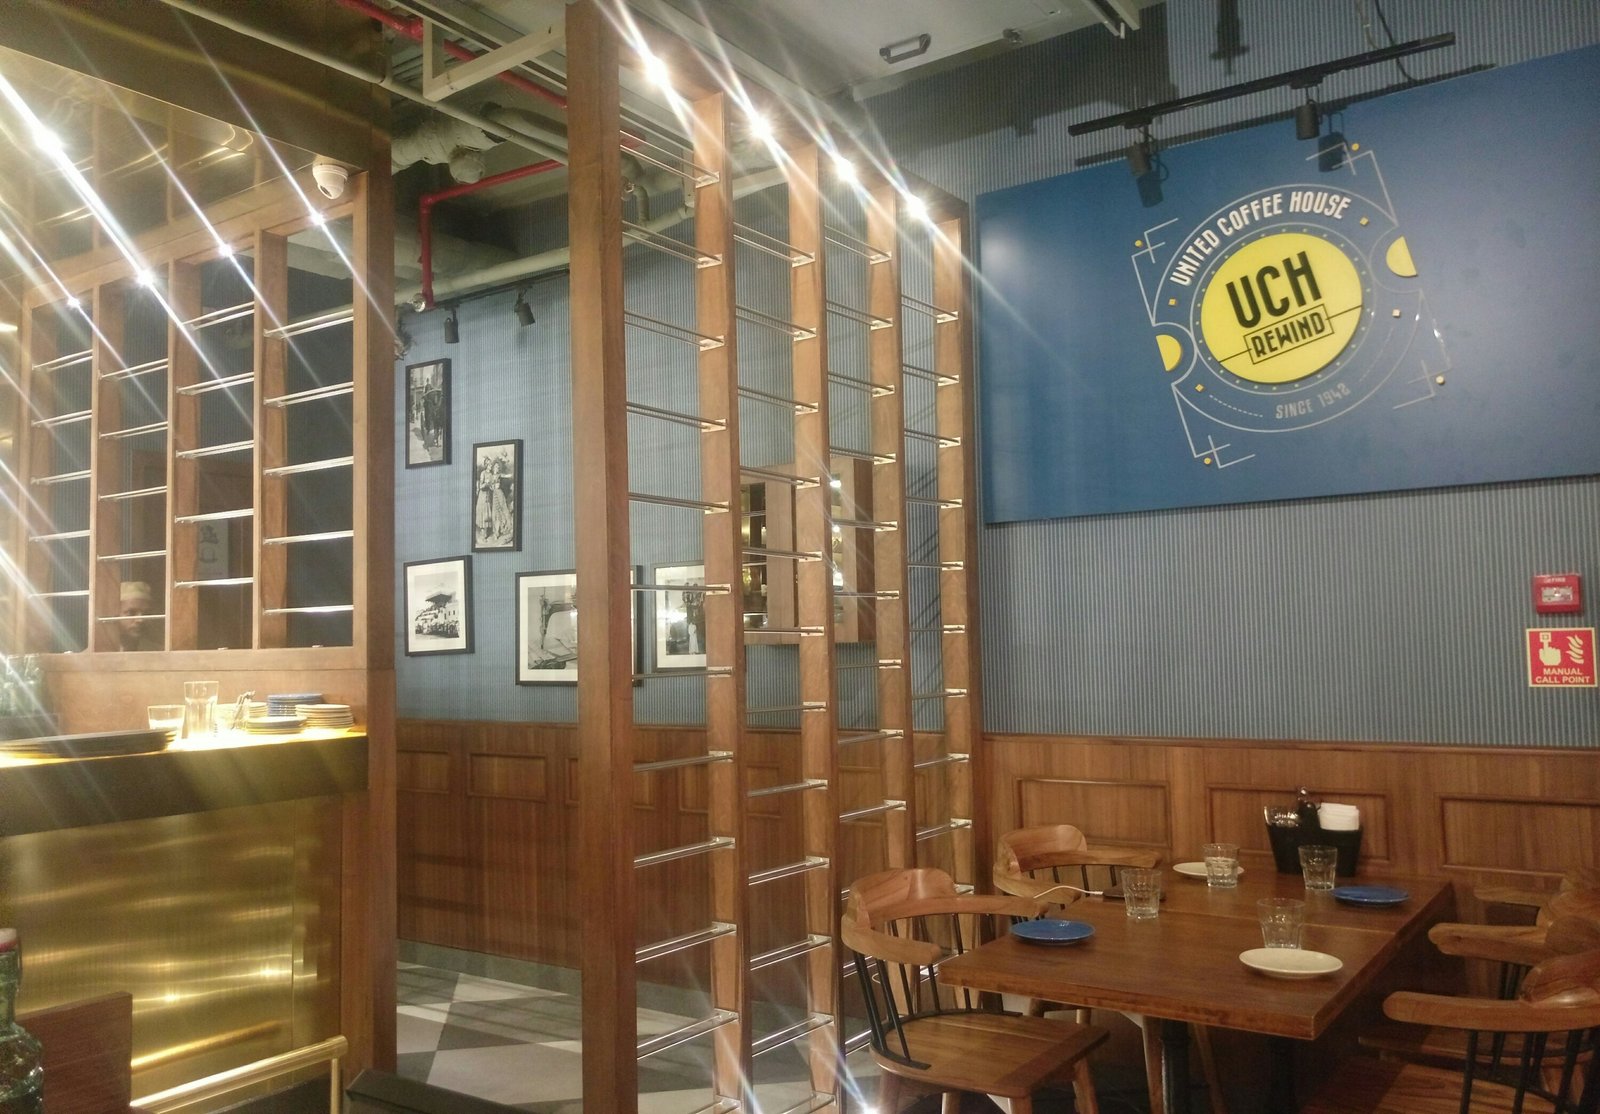 This New United Coffee House Rewind Cafe Will Take You Back In Time!